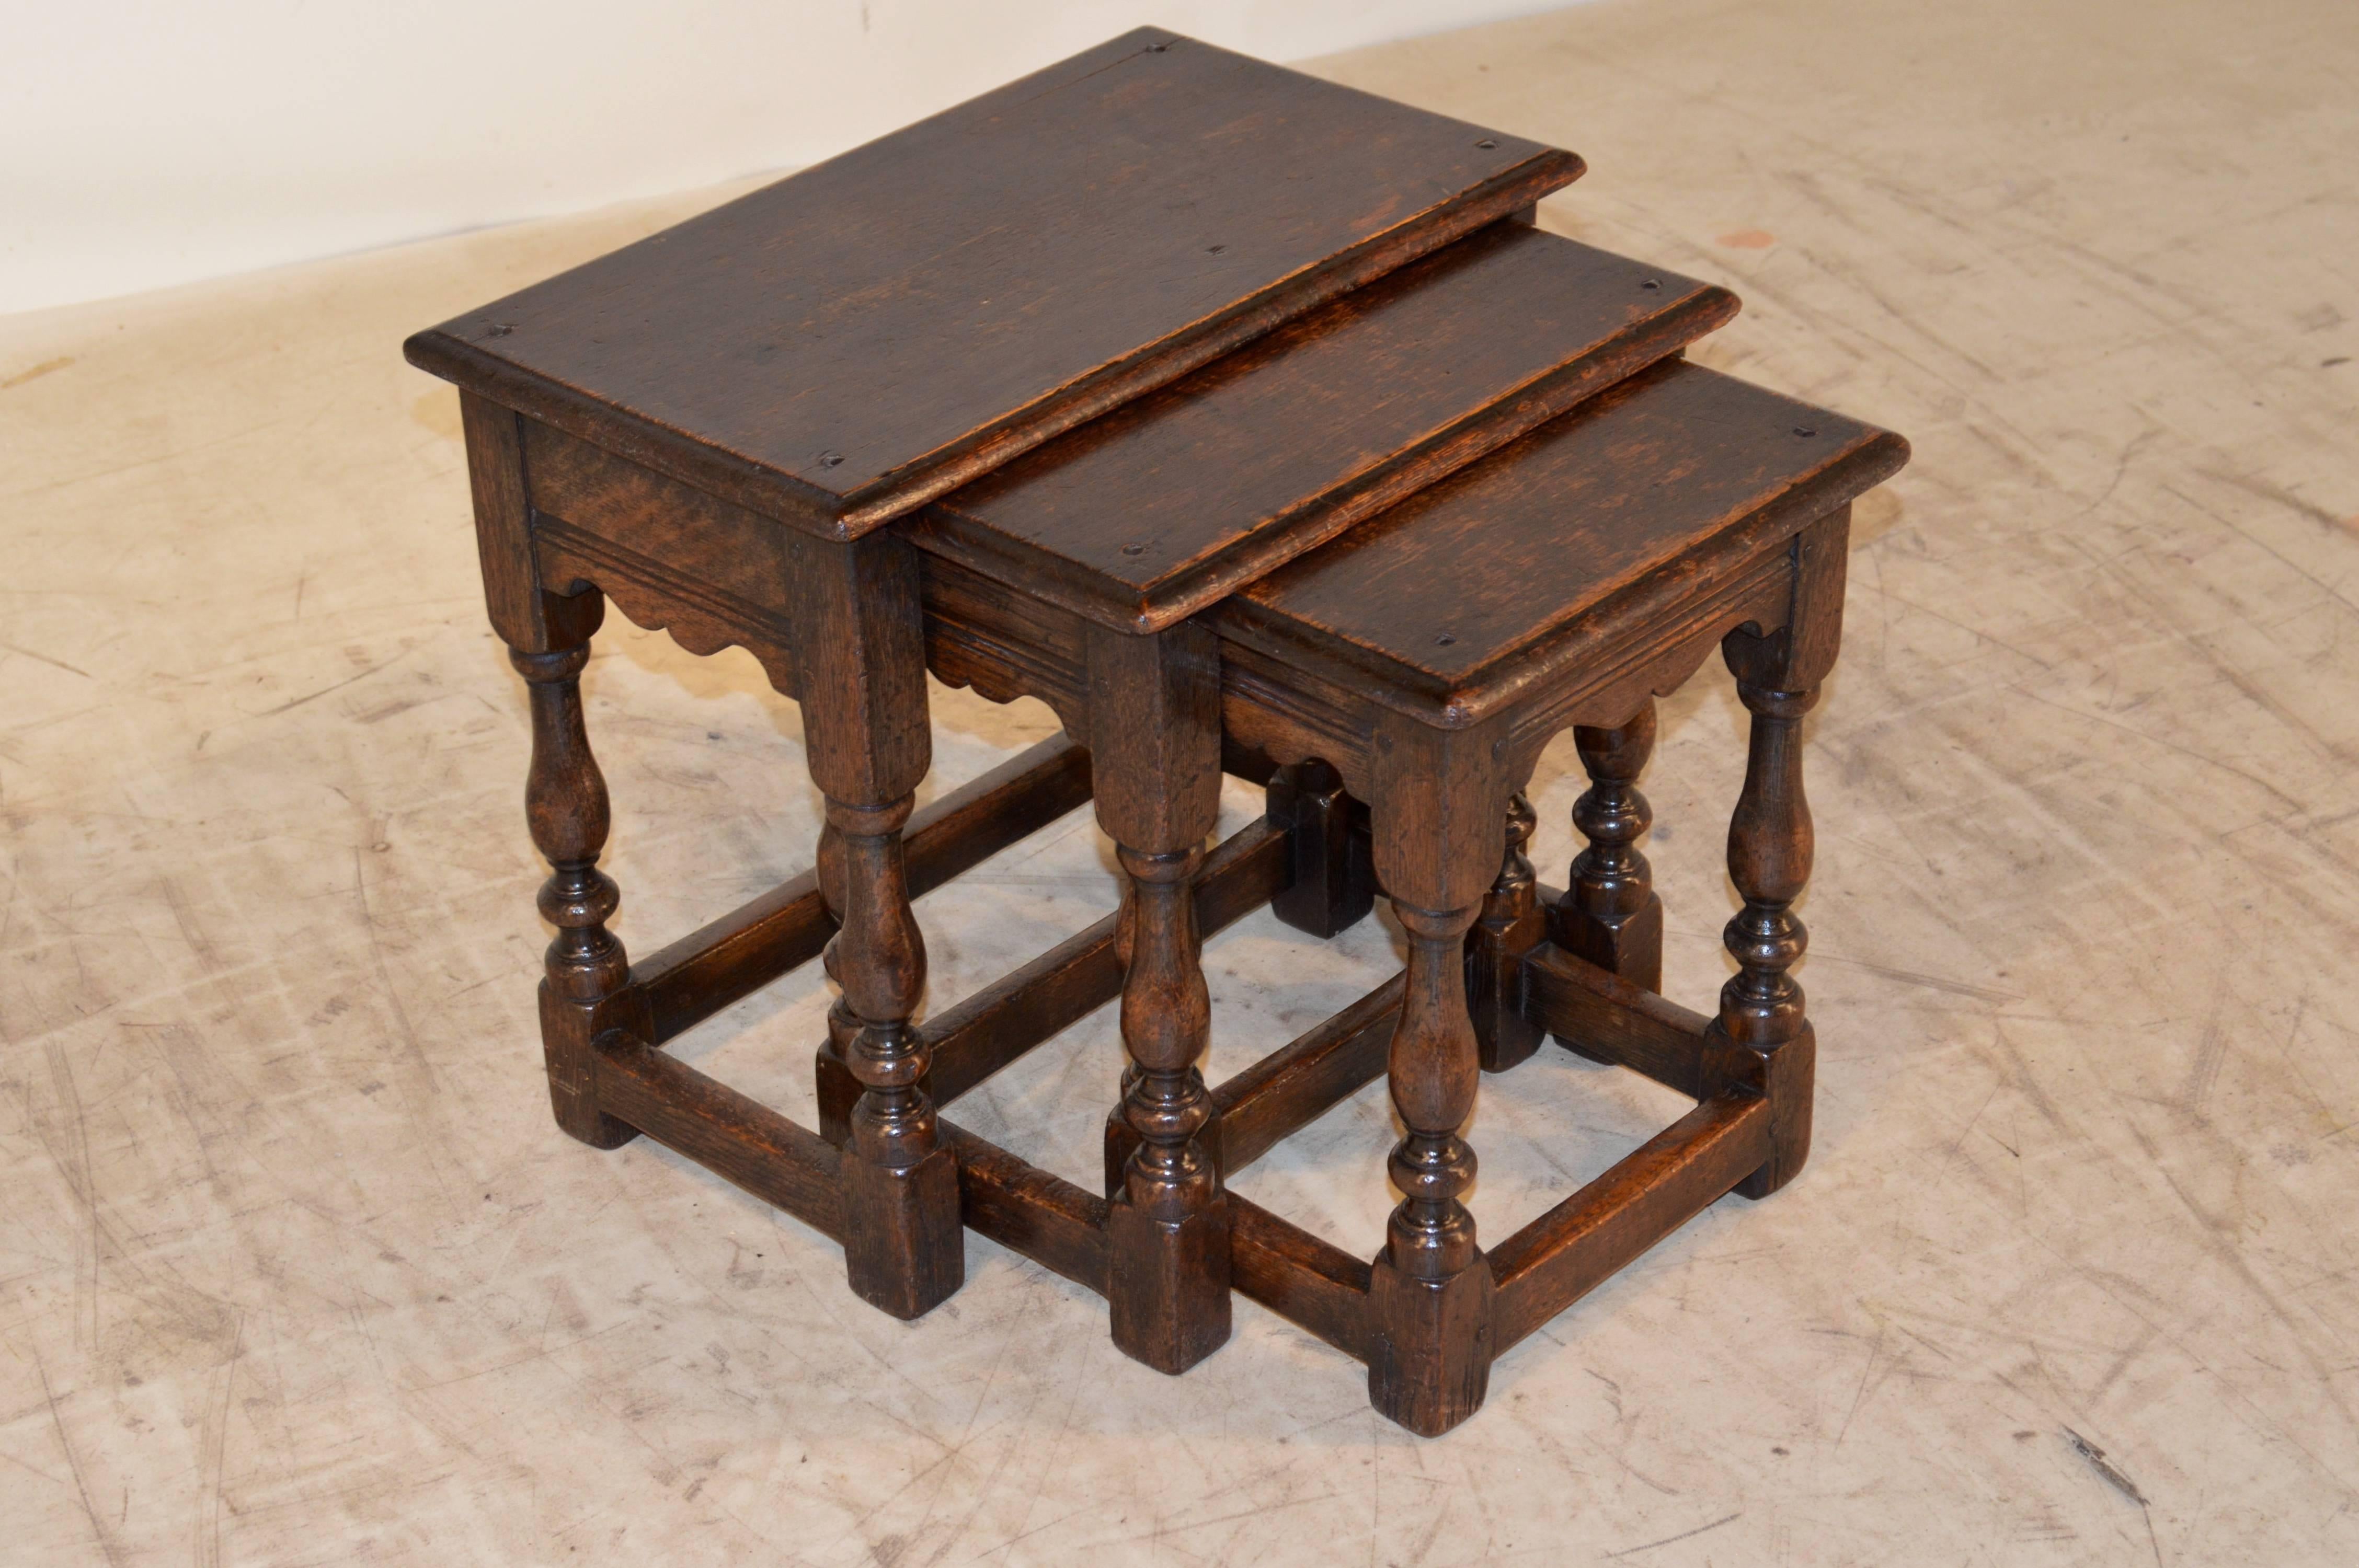 Set of three late 19th century English oak nesting tables. The tops are beveled around the edges and follow down to scalloped and routed decorated aprons. The legs are hand-turned and are joined by stretchers. Measures: Small table, 12.75